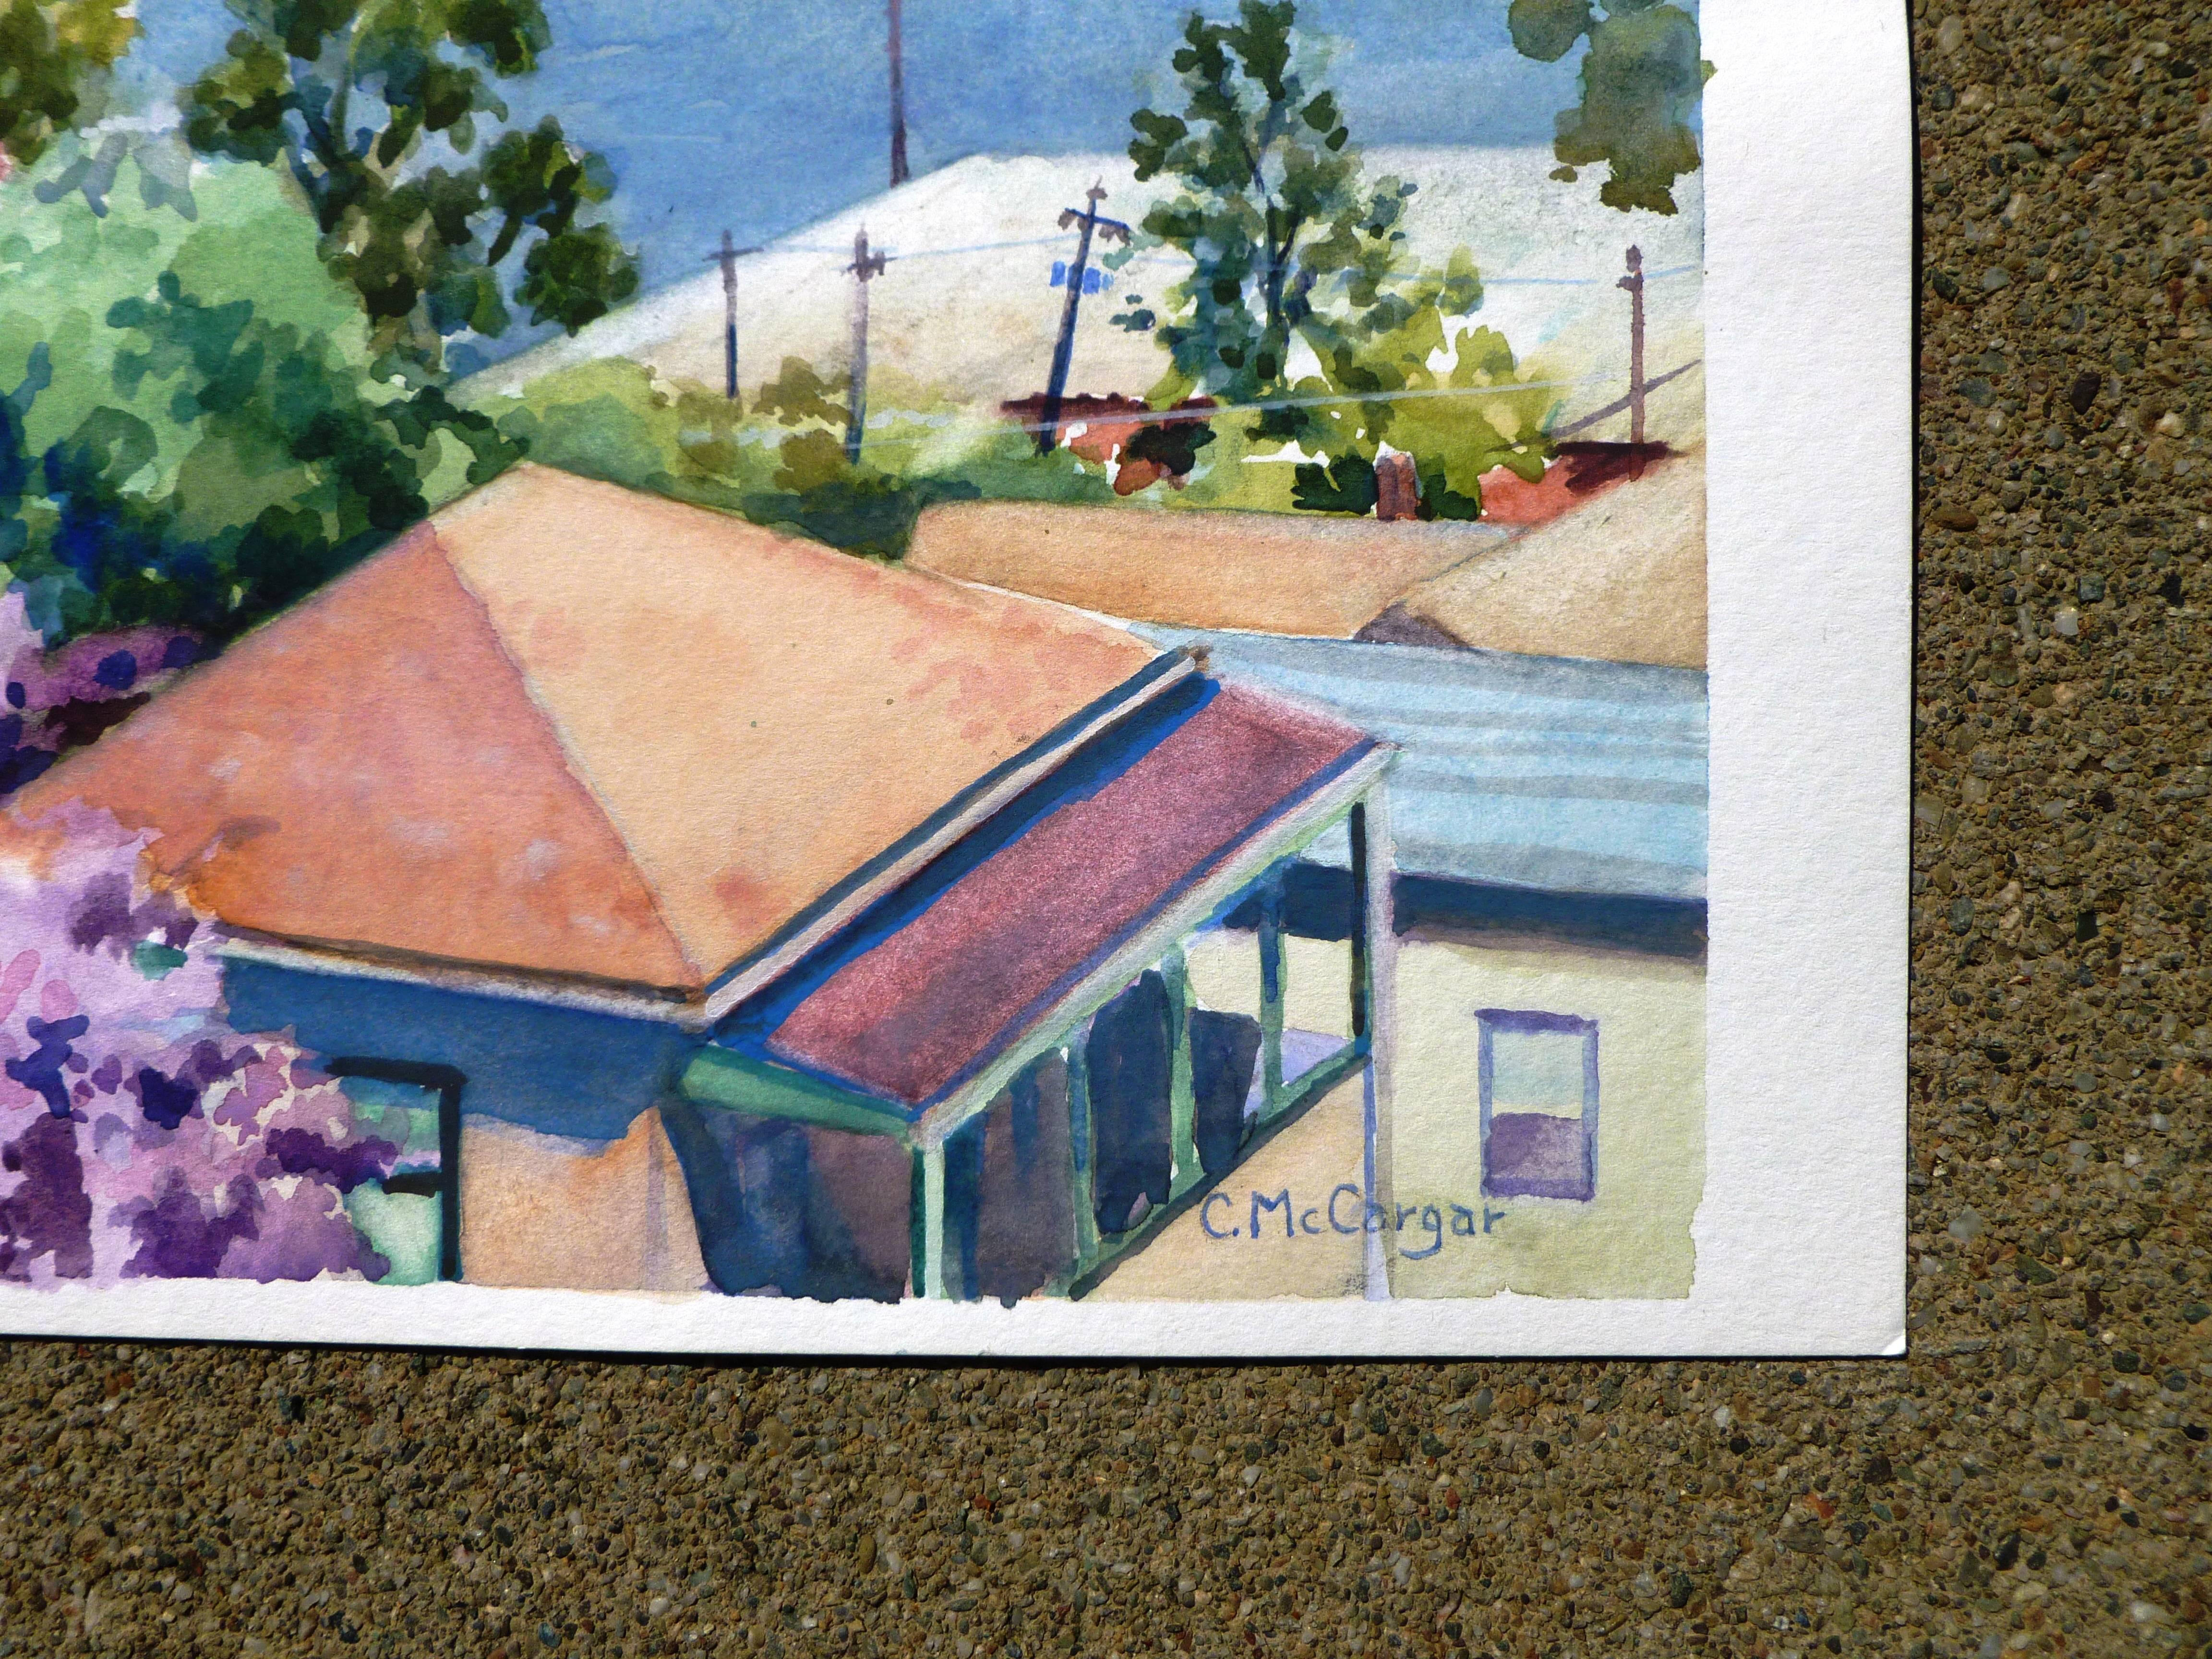 Sugar Town Catherine McCargar Watercolor painting on paper
One-of-a-kind
Signed on front
2013
12 in. h x 18 in. w 
0 lbs. 1 oz. Artist Comments 
I painted this one in Crockett, California, and the factory in the painting is the C ; H Sugar factory